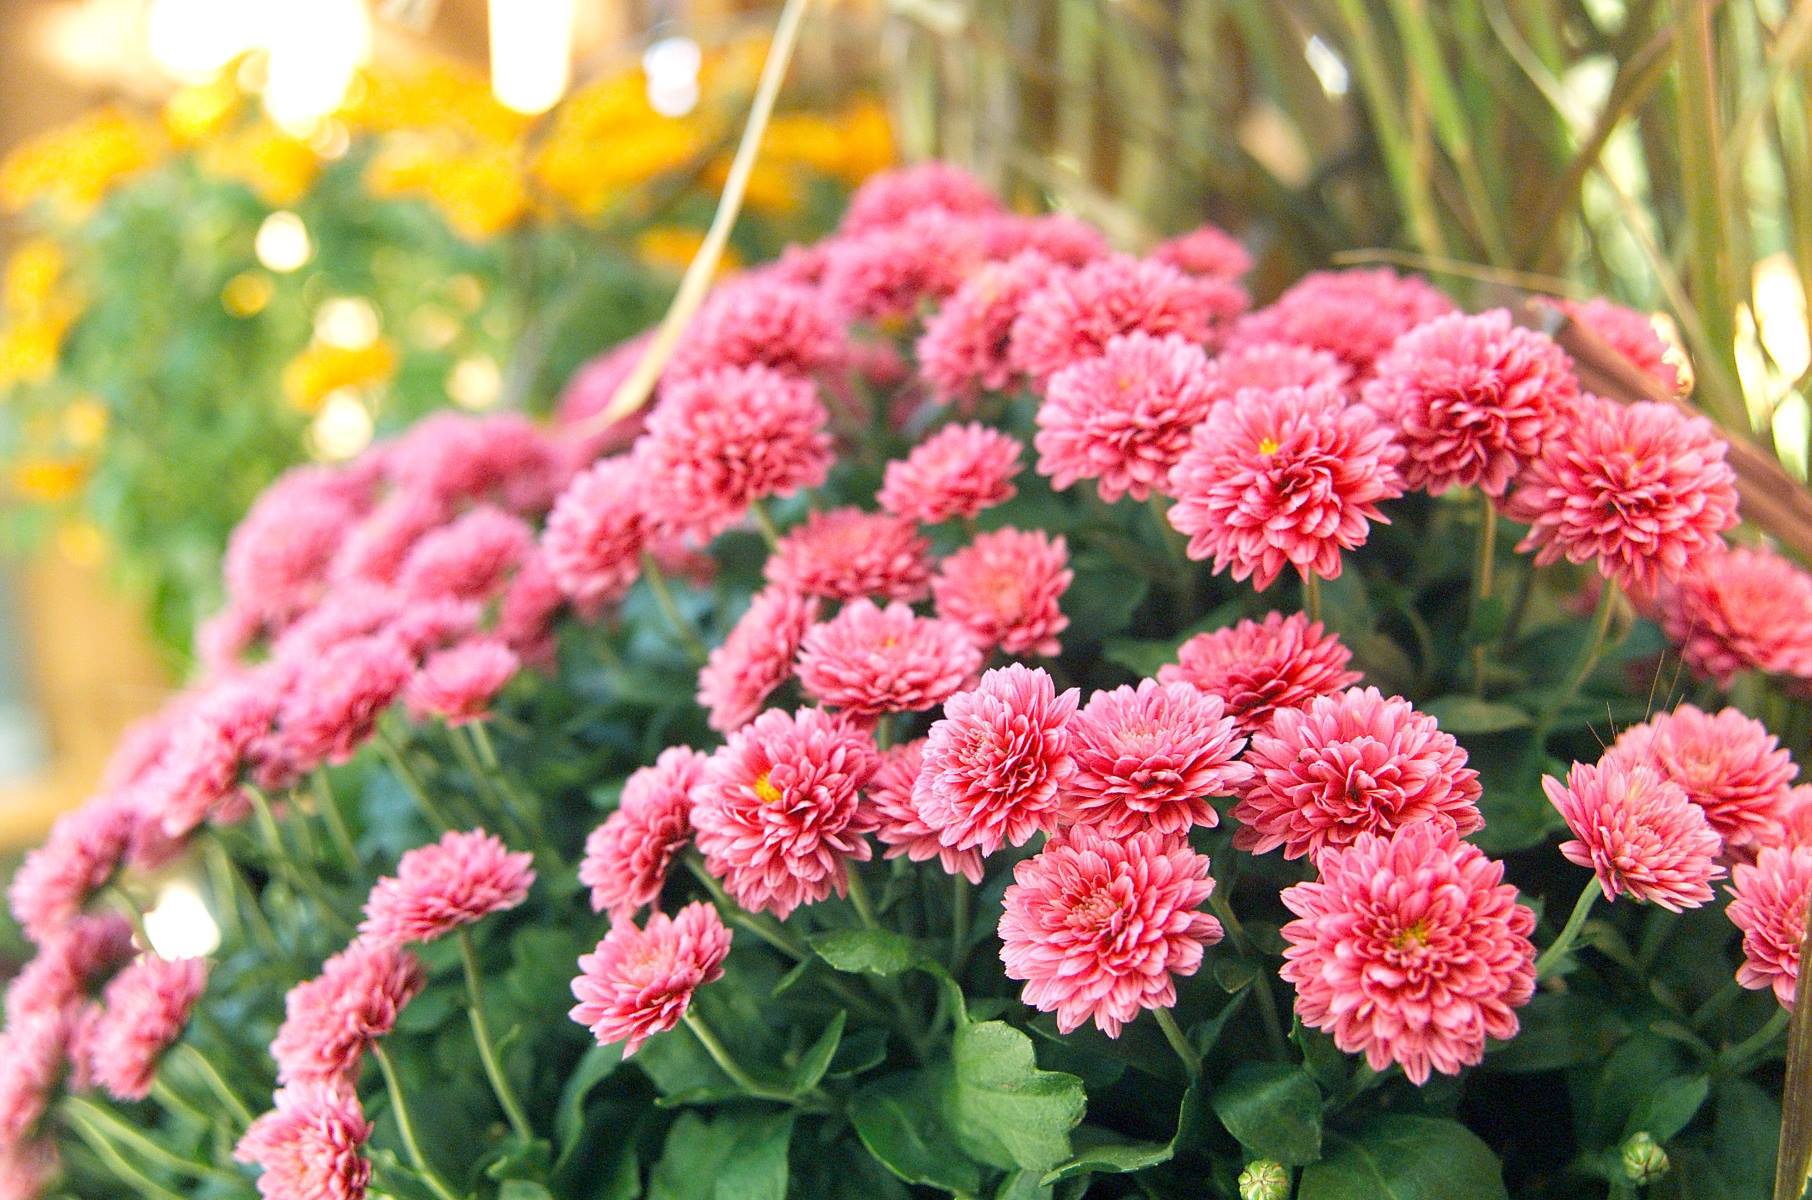 When Do Mums Bloom In Michigan